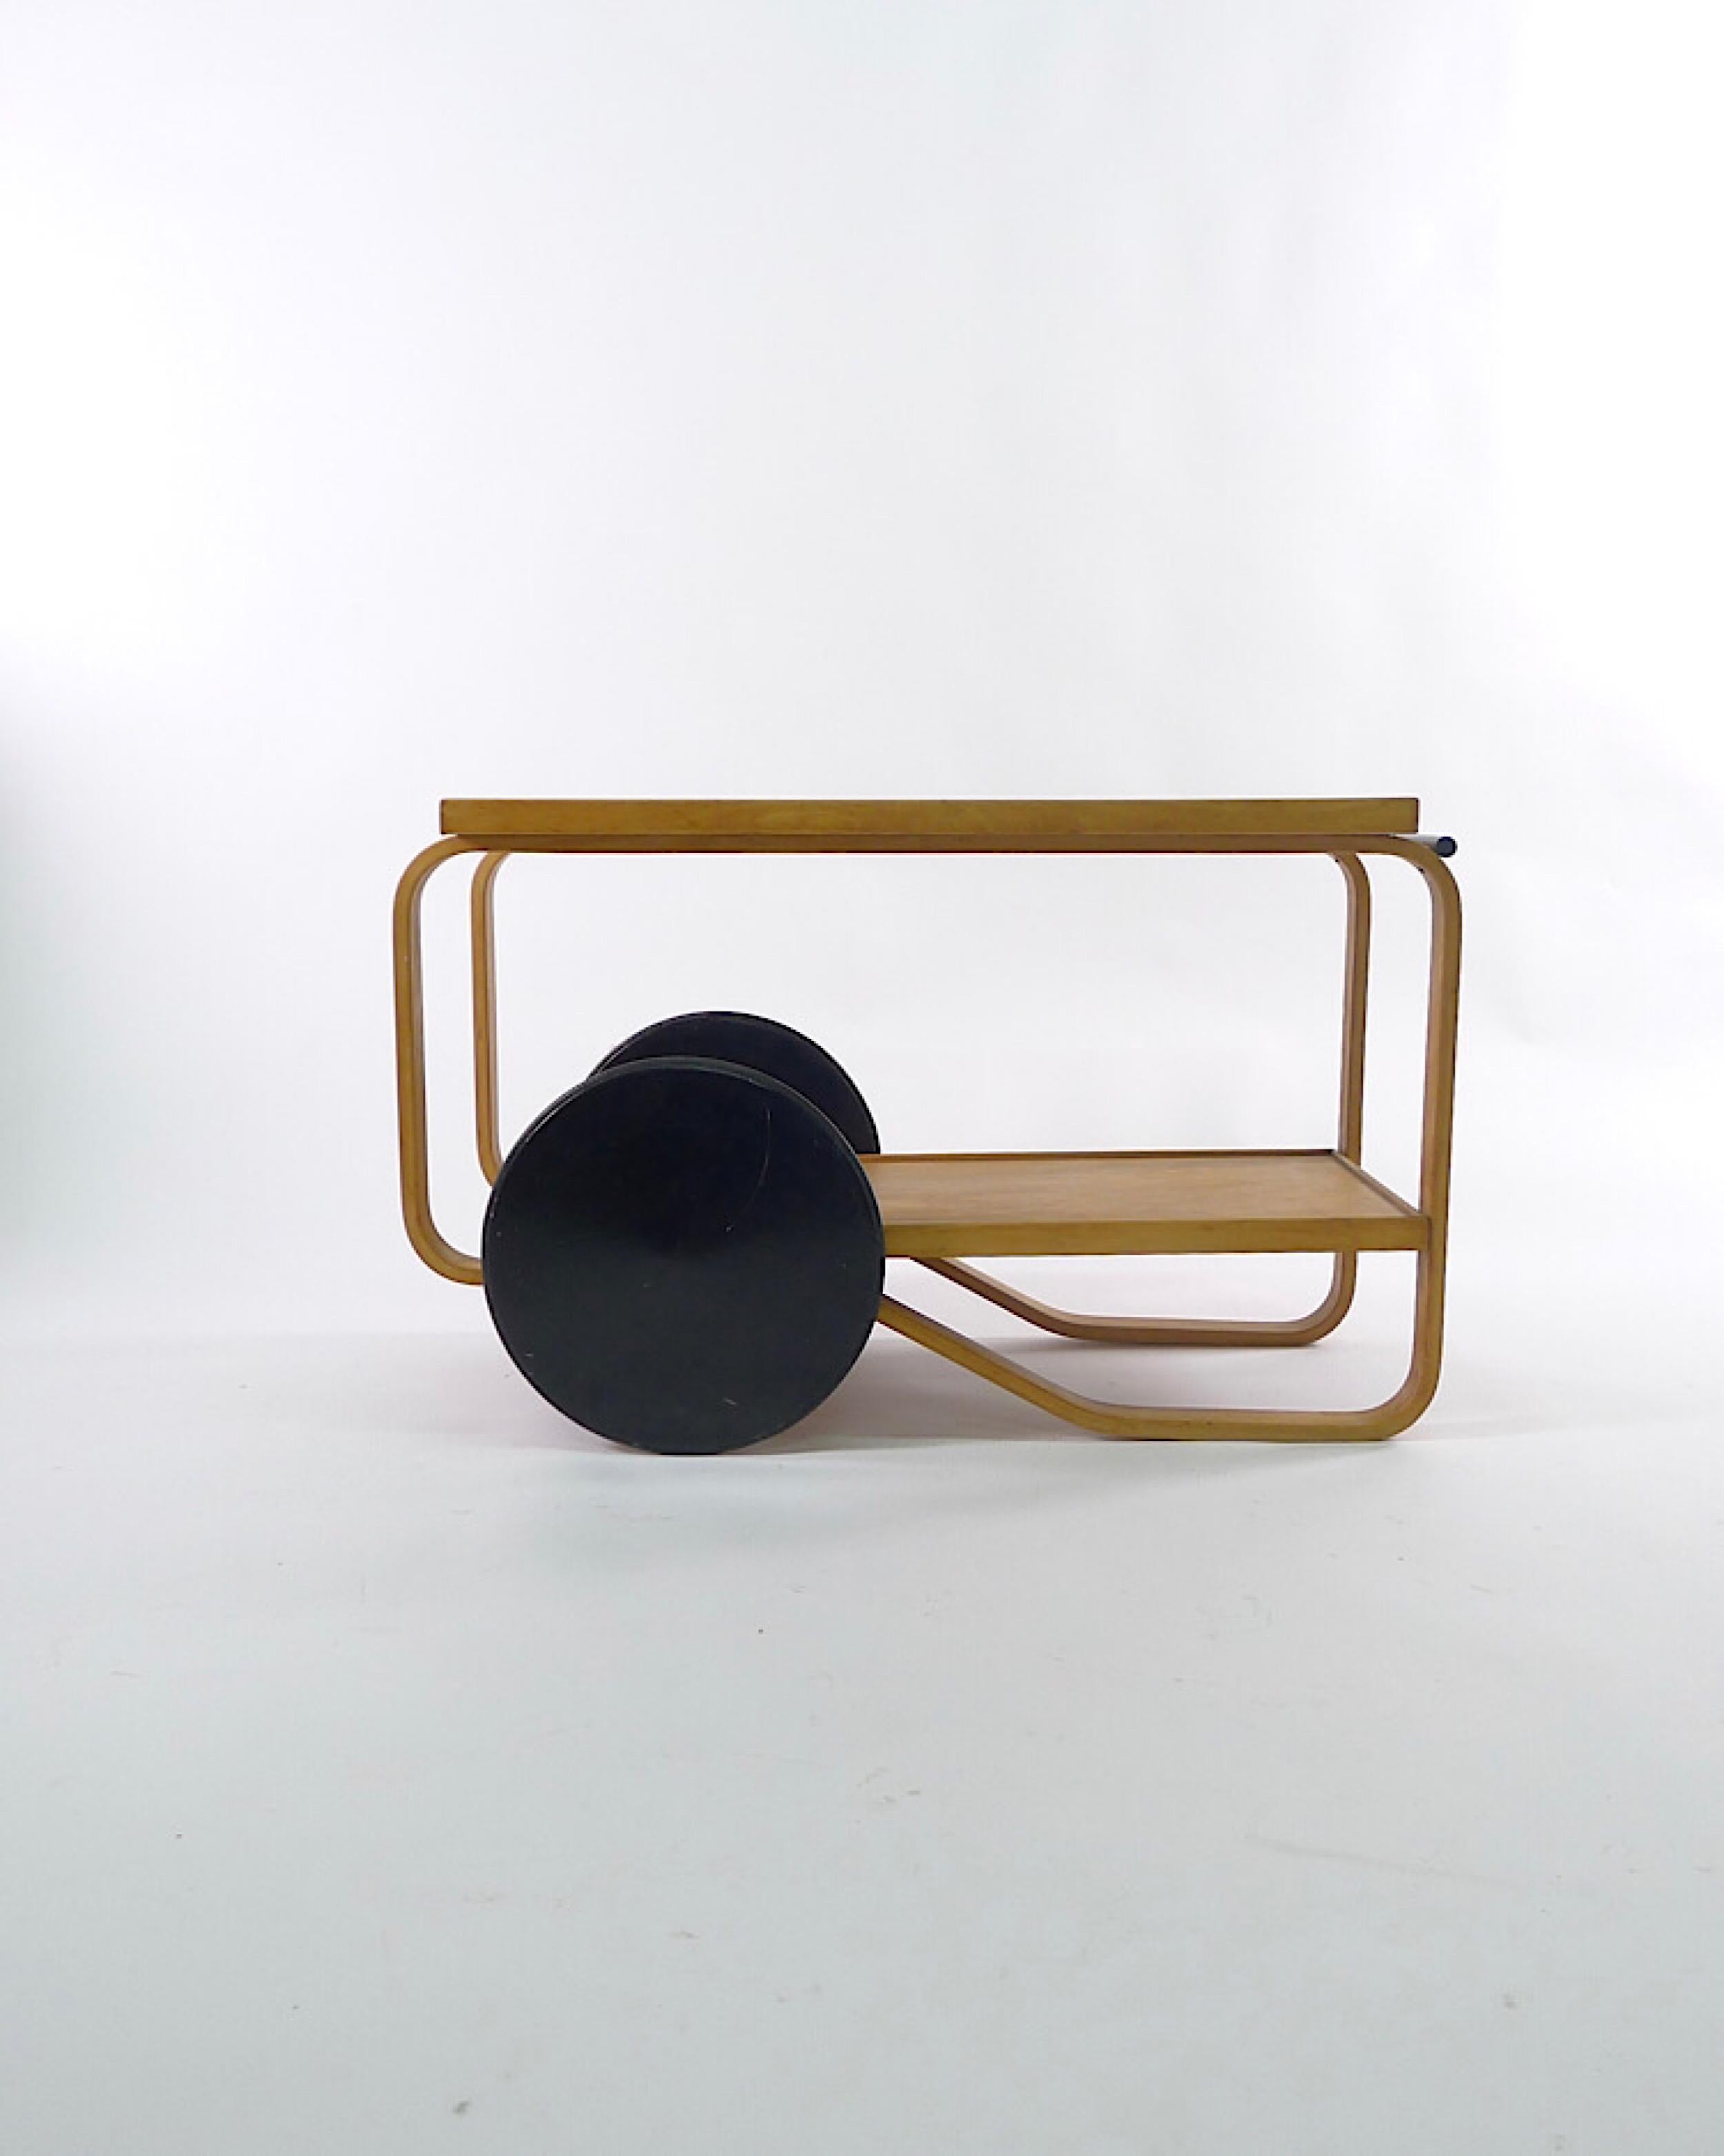 Alvar Aalto, model 98/901 serving trolley, for tea or drinks, designed in 1935 this is an early original example, bearing Finmar Ltd label, in birch plywood with black painted wheels.